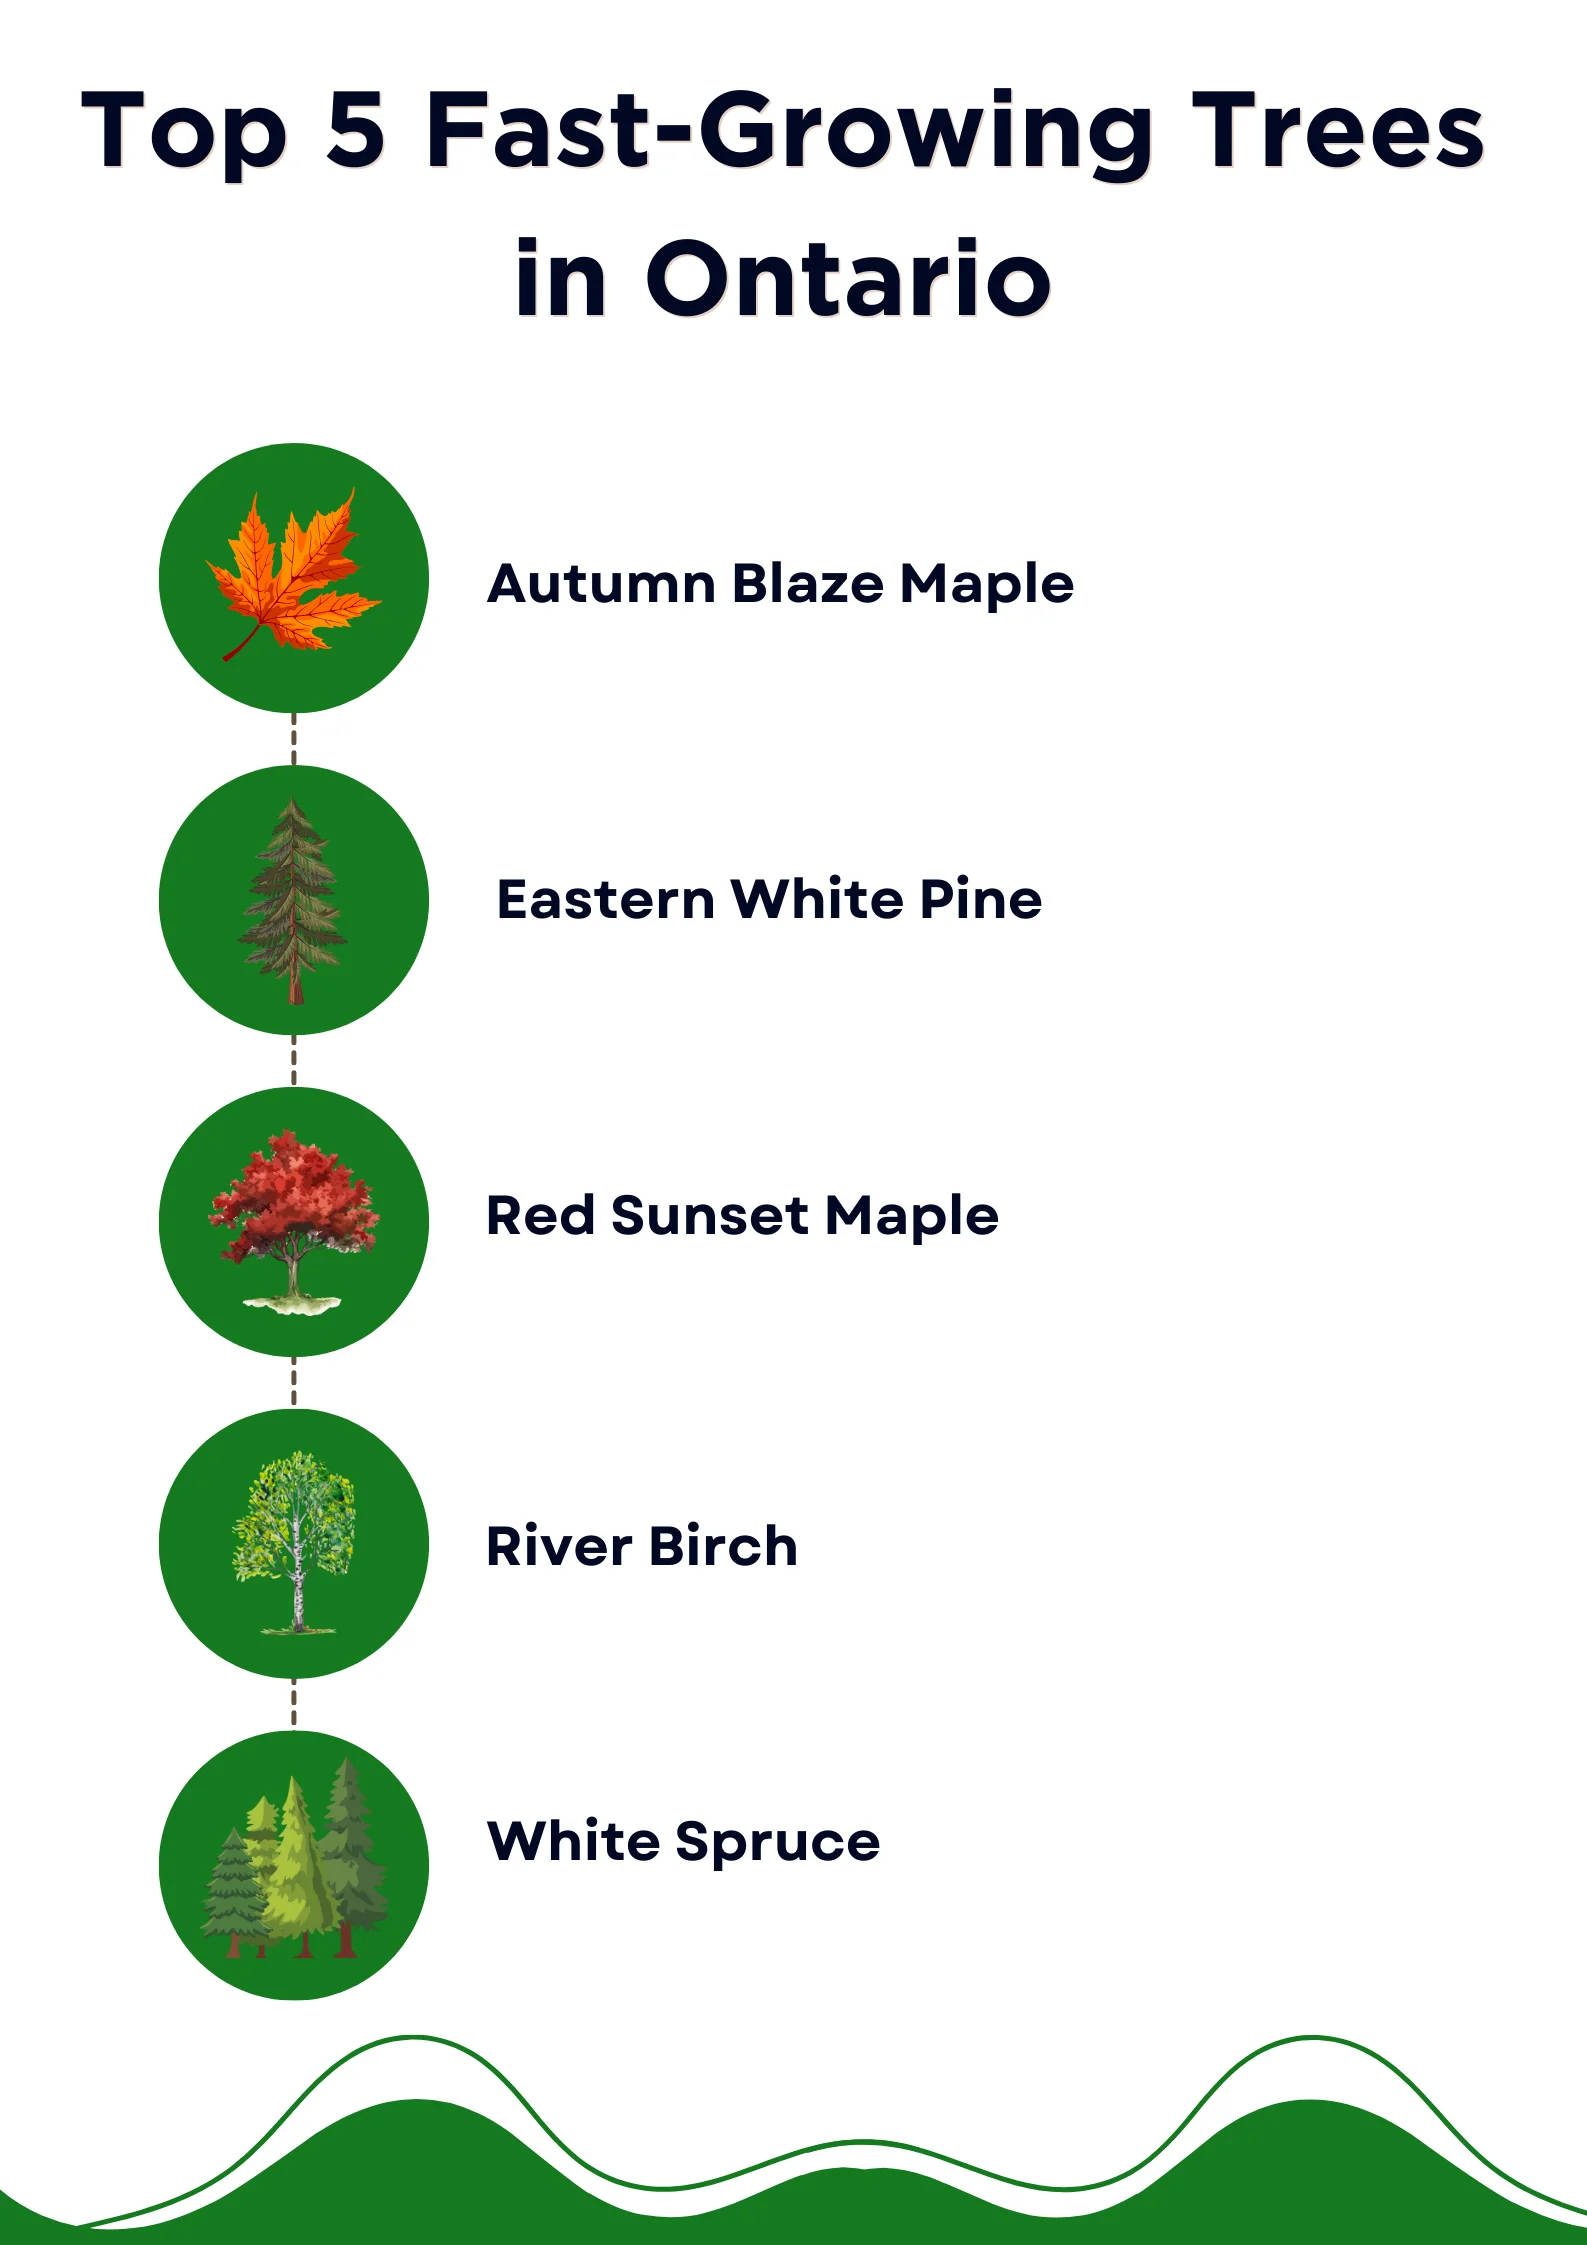 An infographic on the best fast-growing trees in Ontario